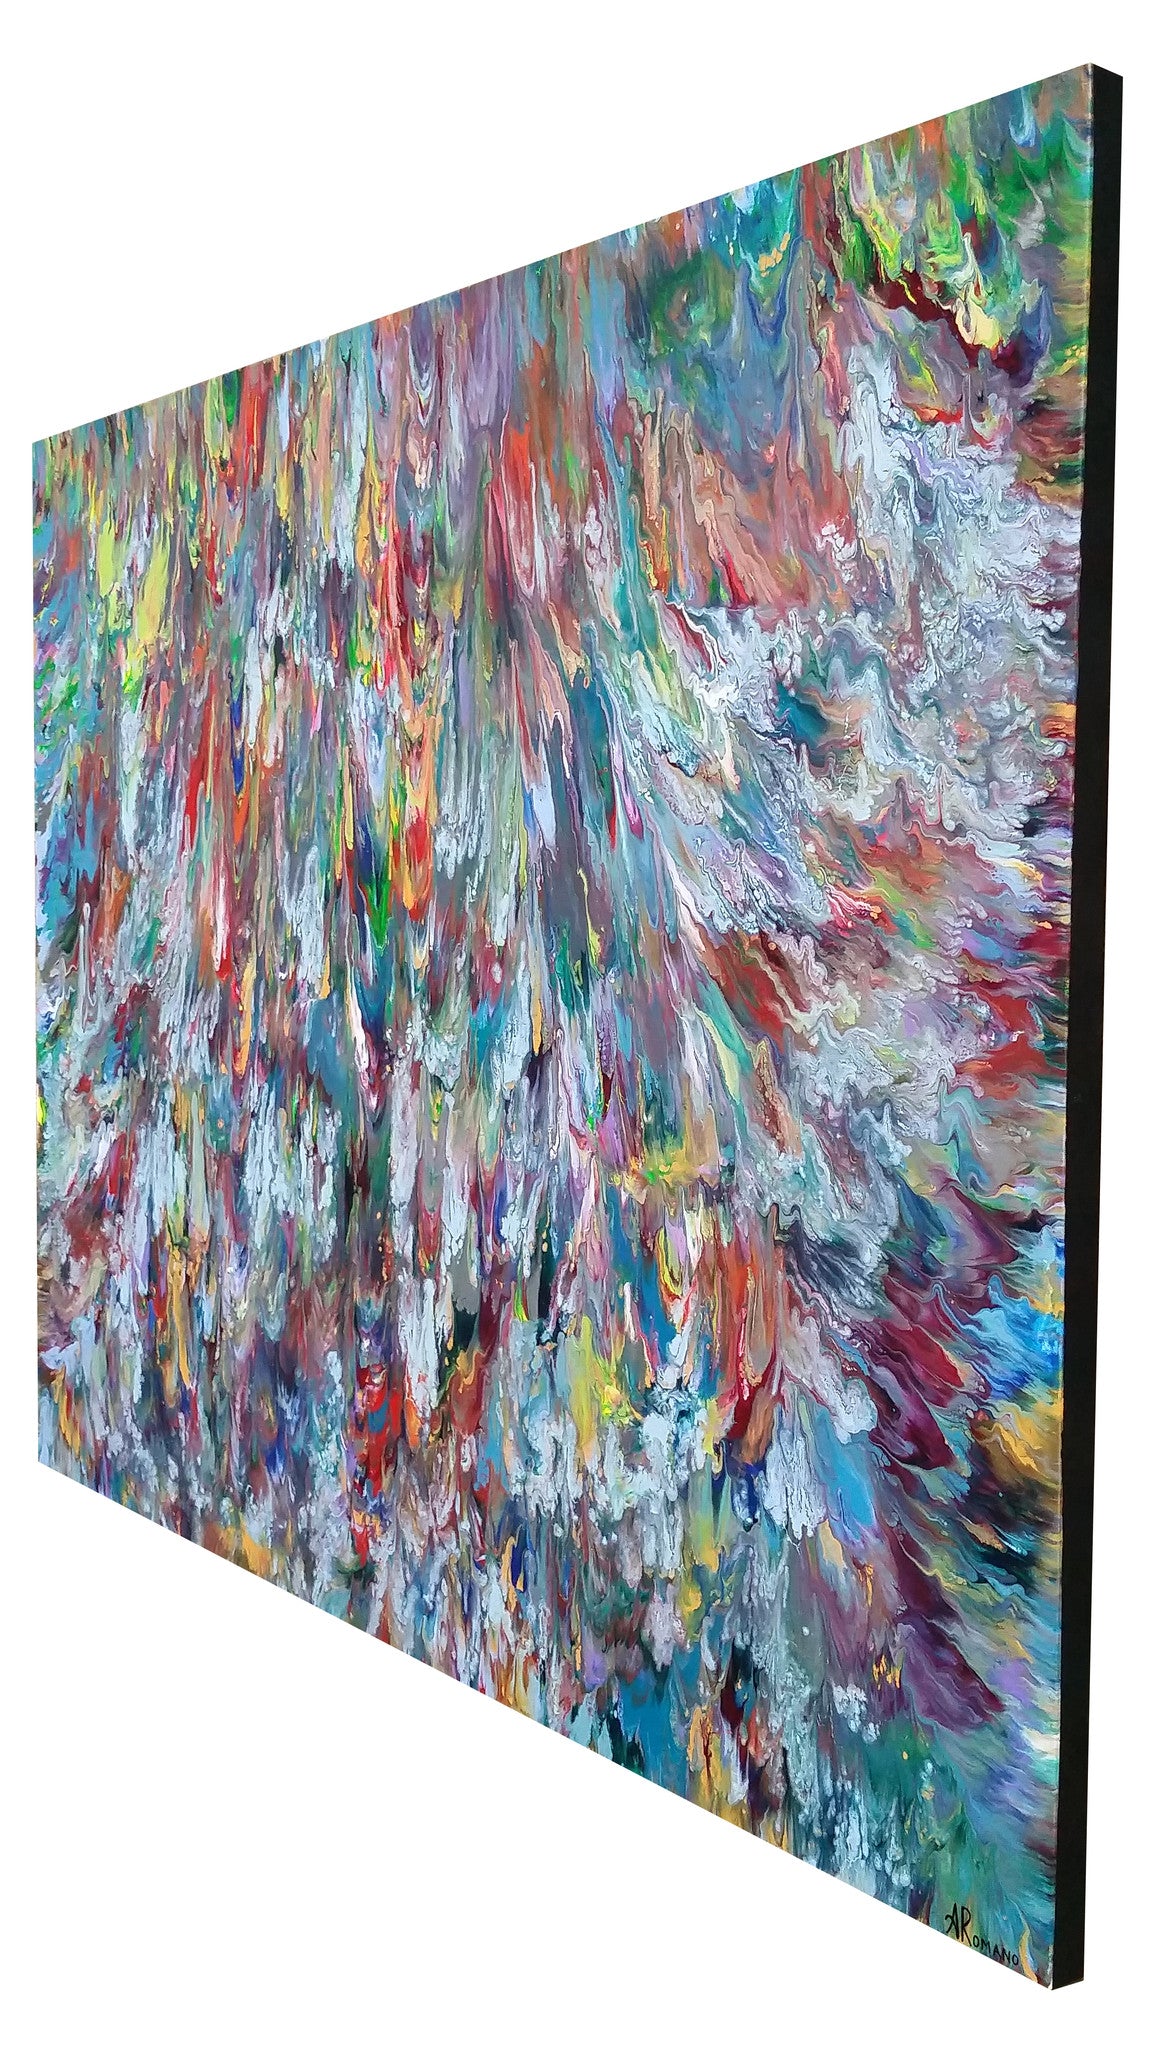 Triton's Revenge Sea Ocean Abstract Expressionism Fluid Acrylic Large Painting Modern Art 60x40 inch Canvas Ready to Hang